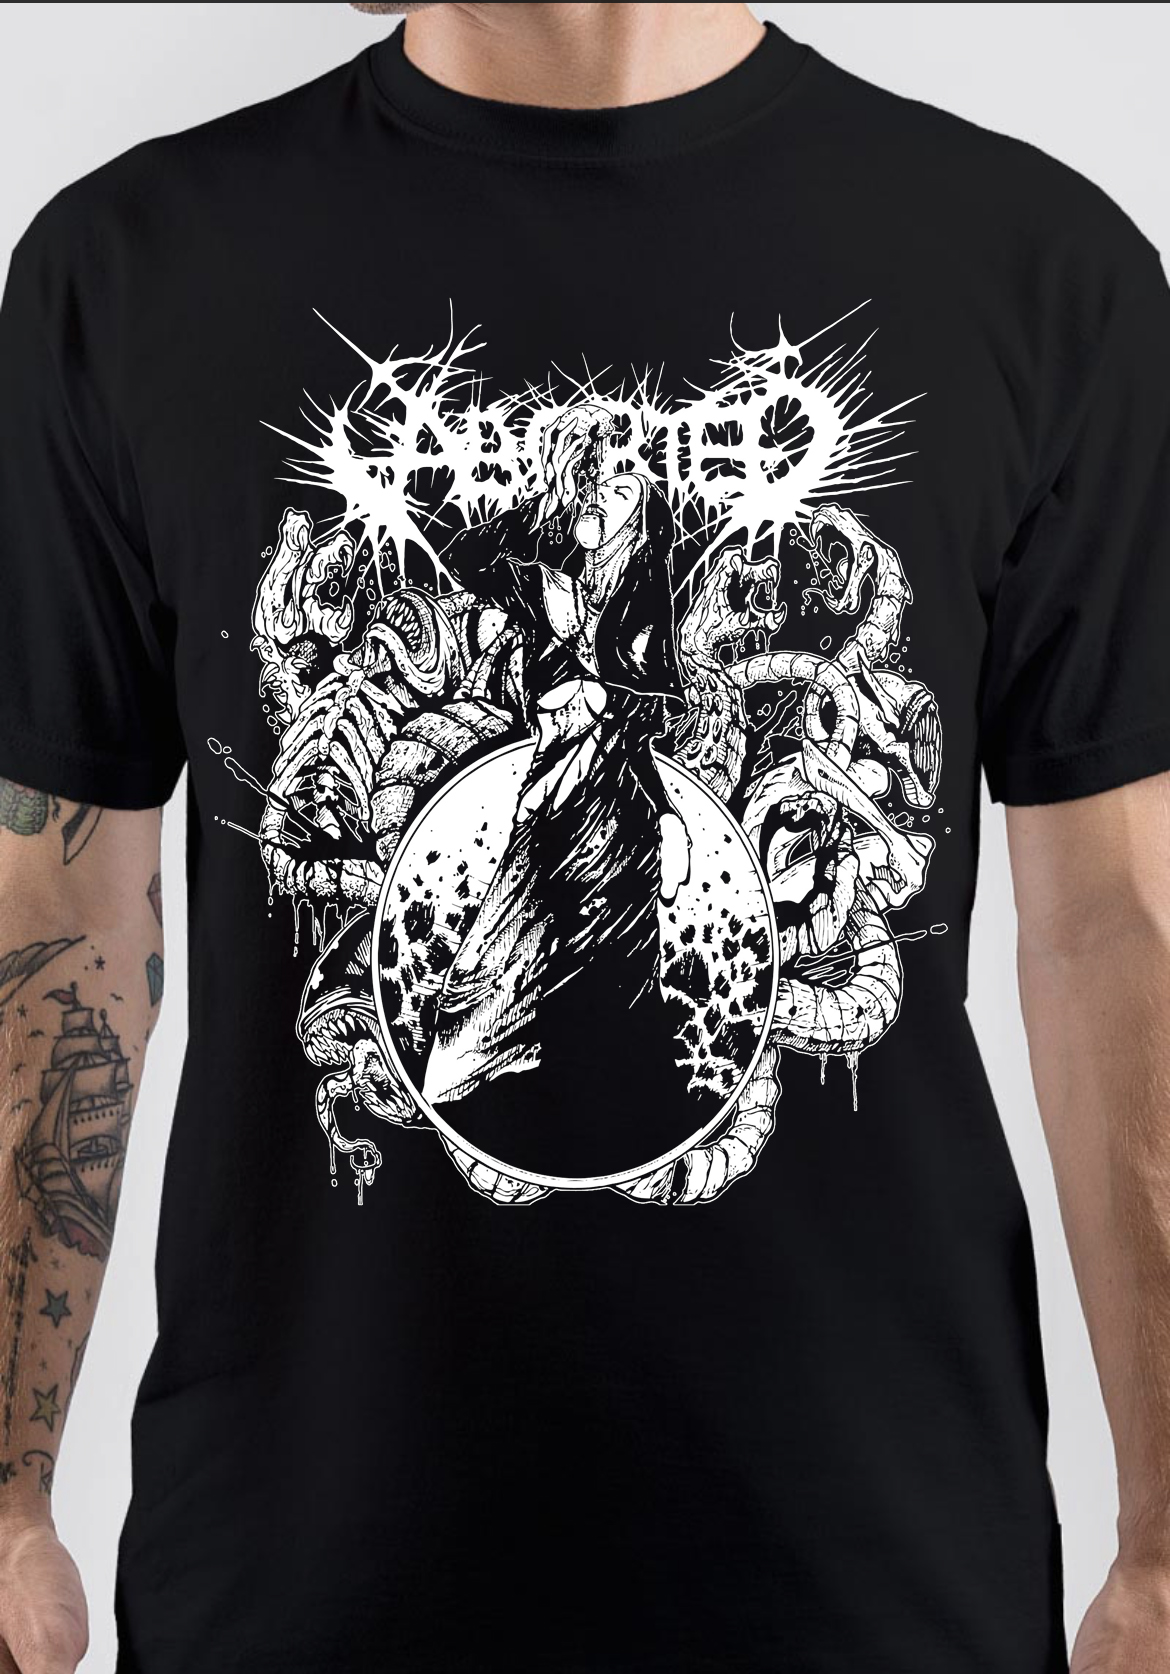 Aborted T-Shirt And Merchandise